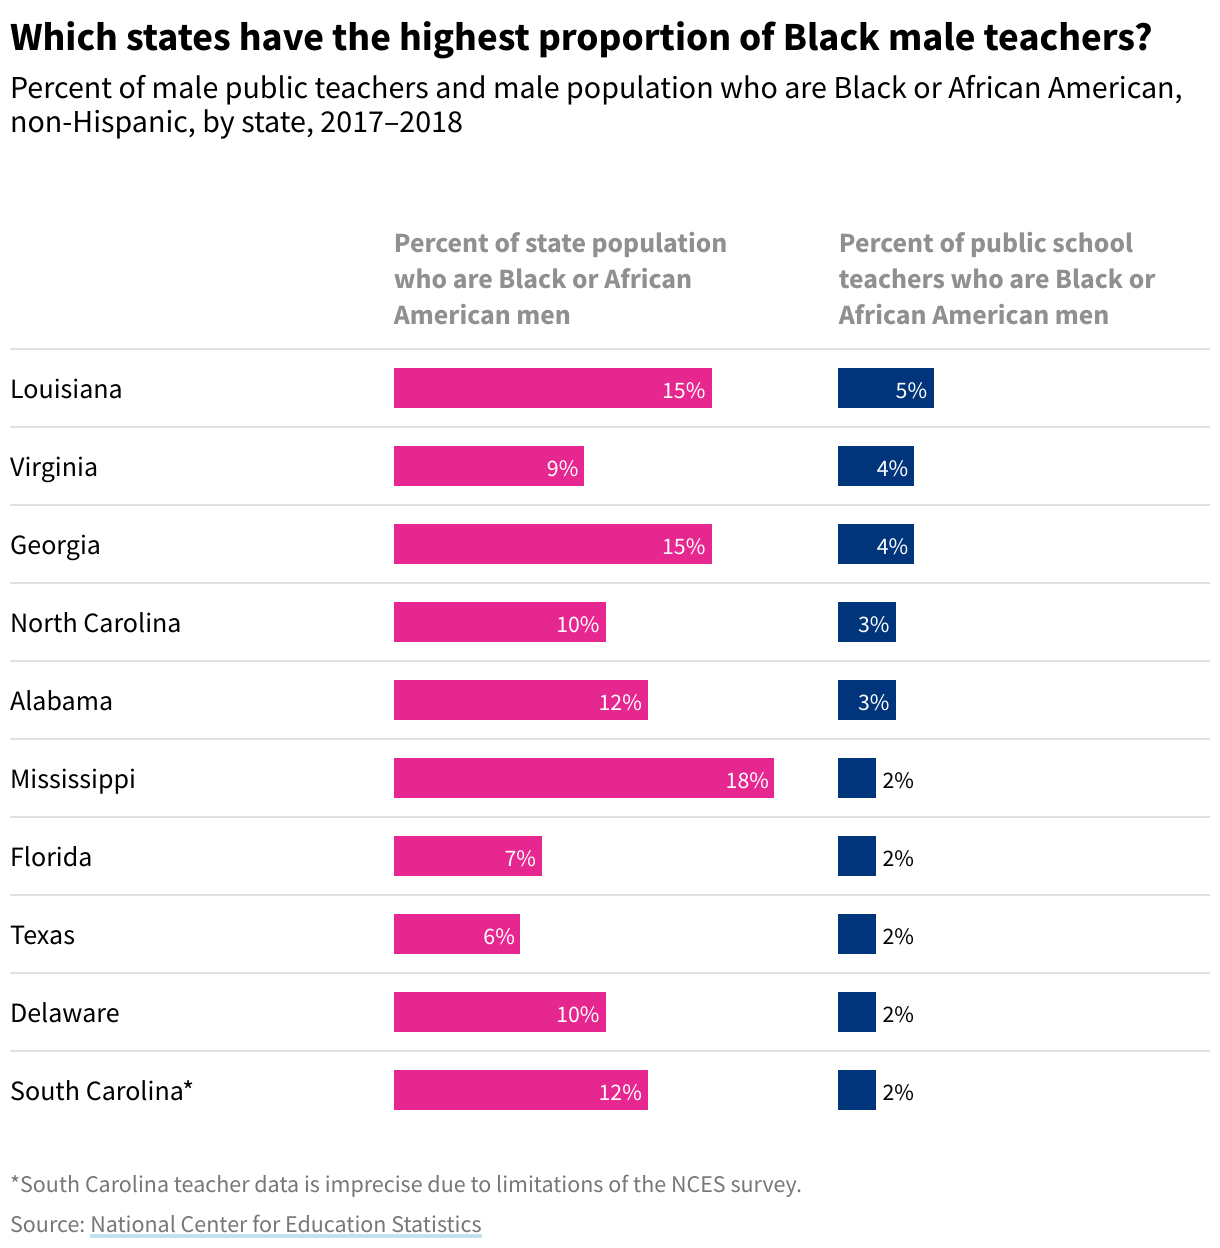 Table showing the percent of male public teachers and male population who are Black or African American, non-Hispanic, by state, 2017–2018